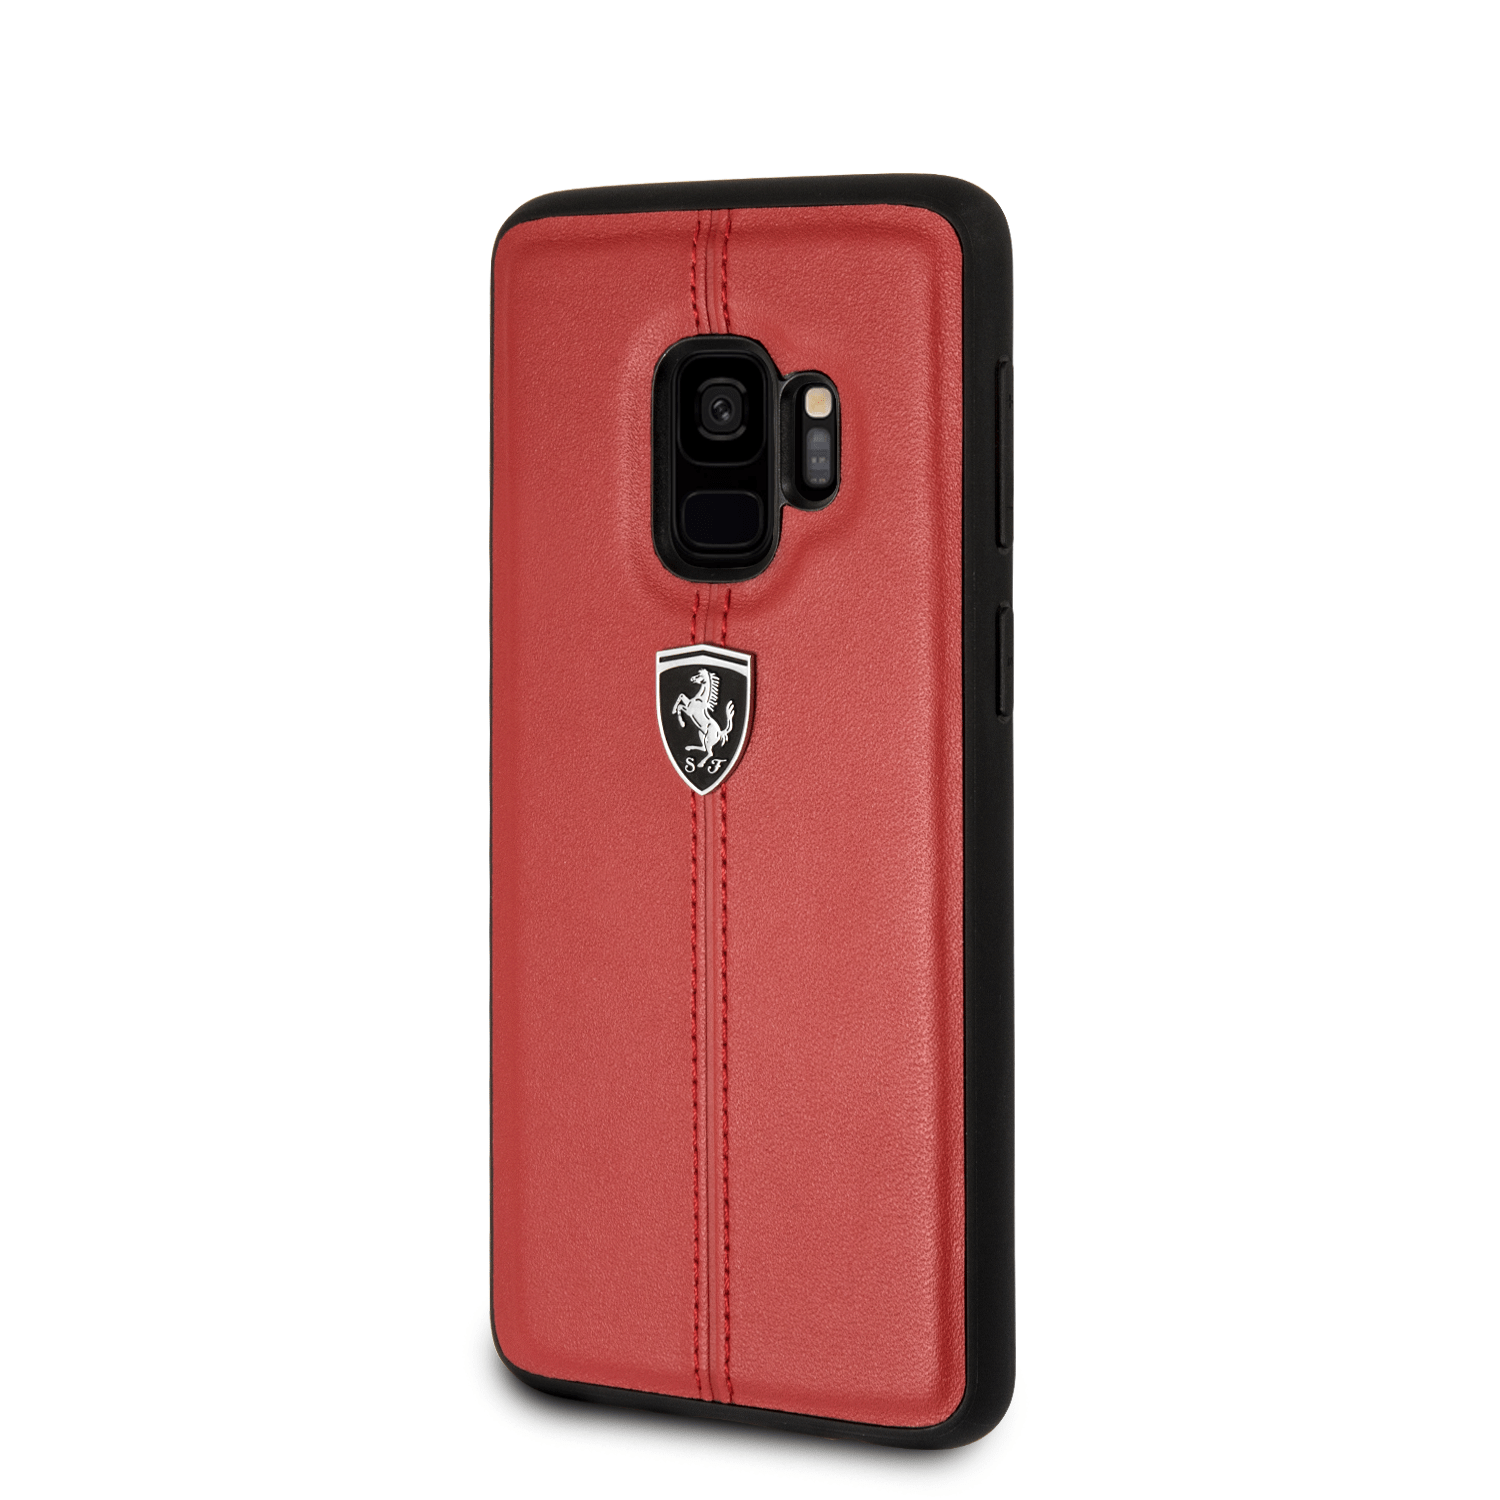 Official Ferrari Genuine Leather Heritage RED Case For Samsung Galaxy S9